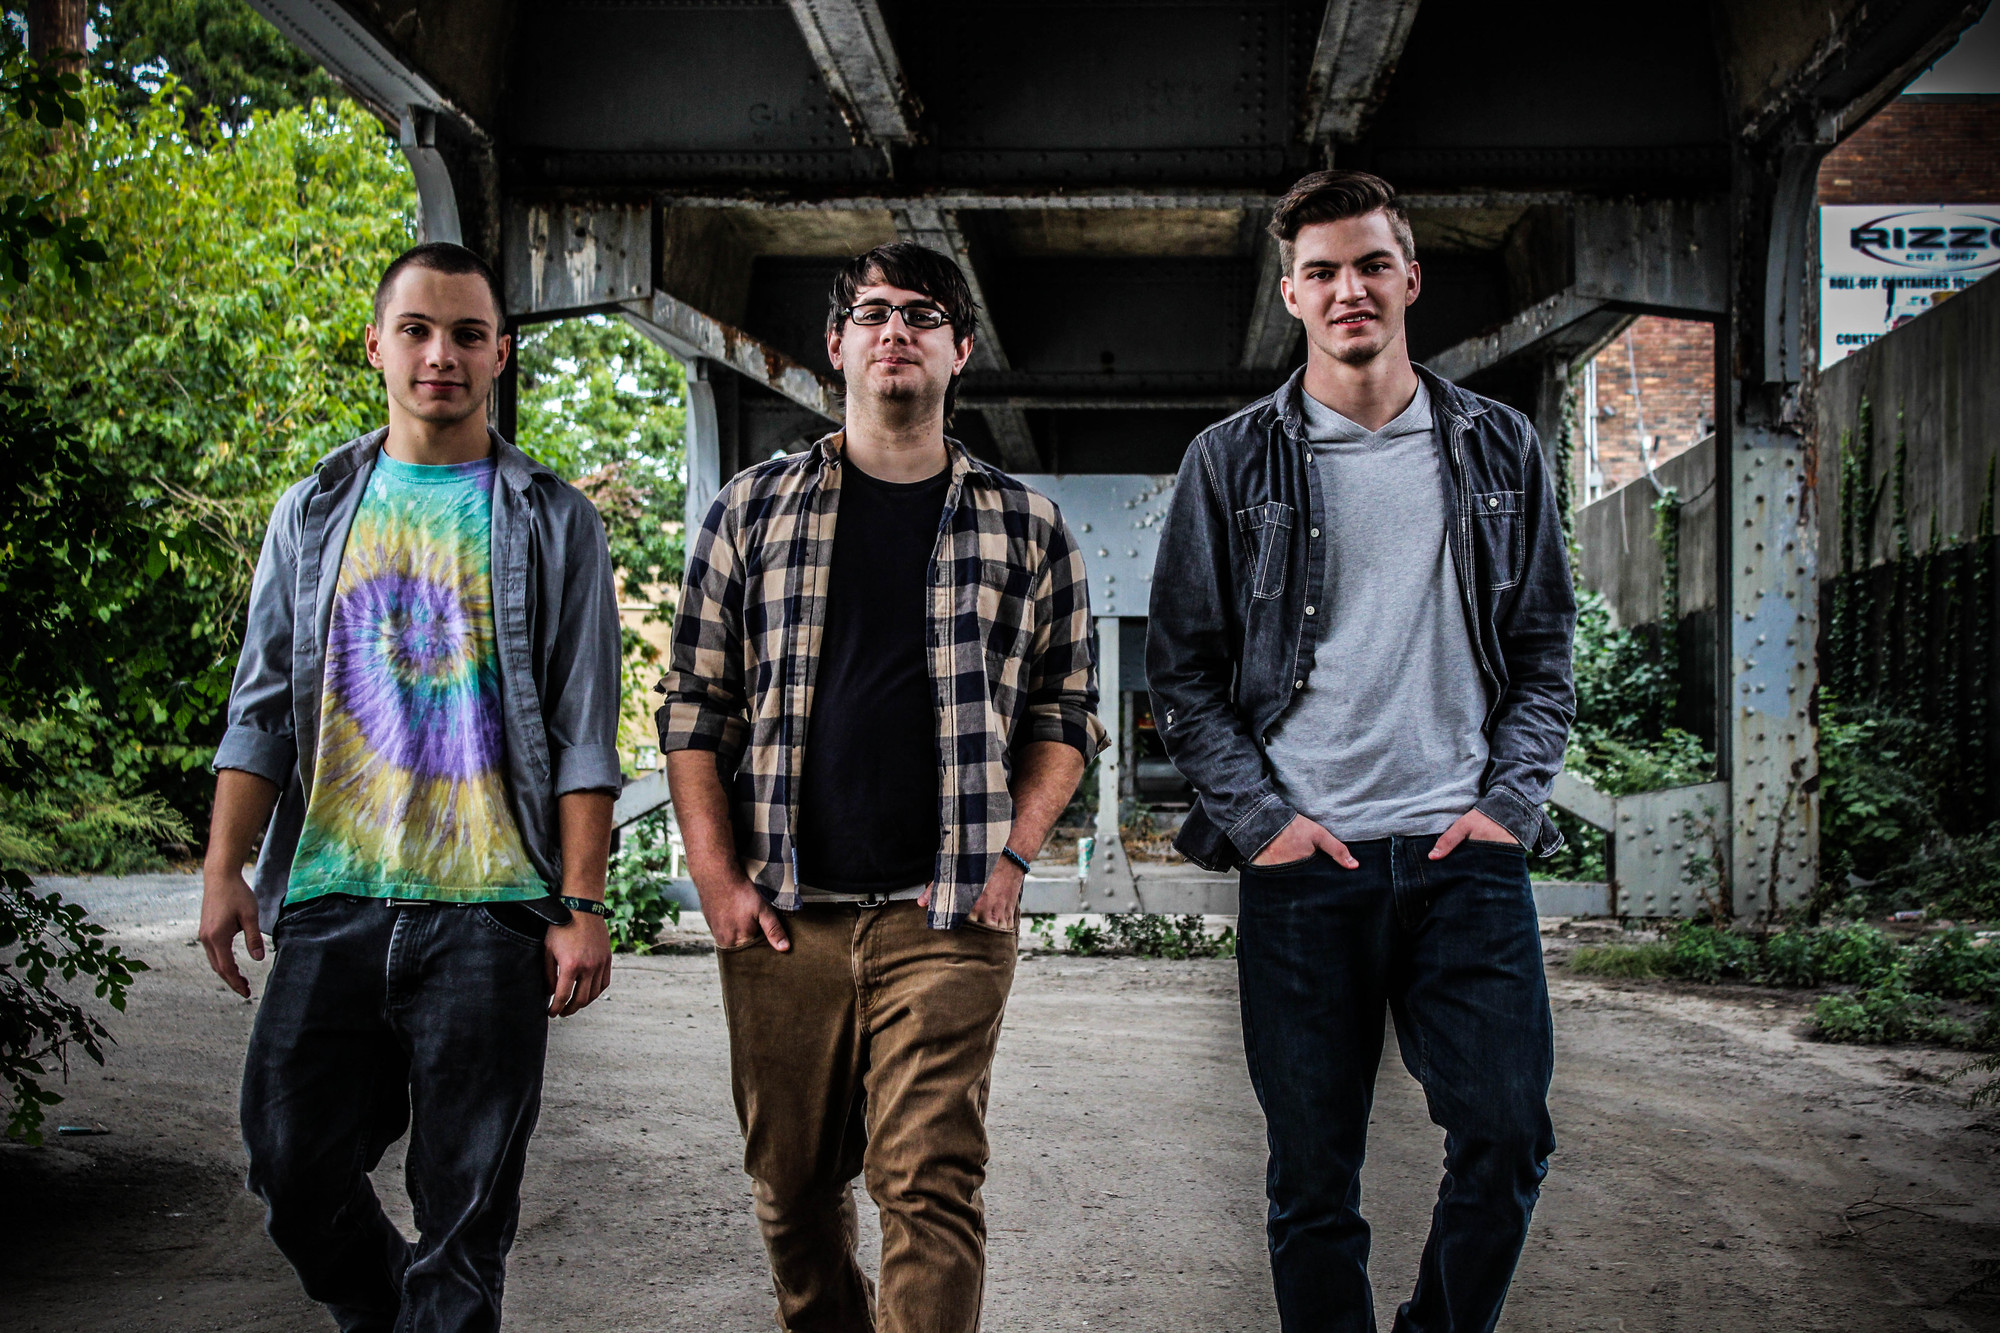 Schoeffel, of Valley Stream, recently won a Battle of the Bands and will play The Paramount in Huntington. From left are Brandon Mirth, Austin Schoeffel and Michael Gallagher.